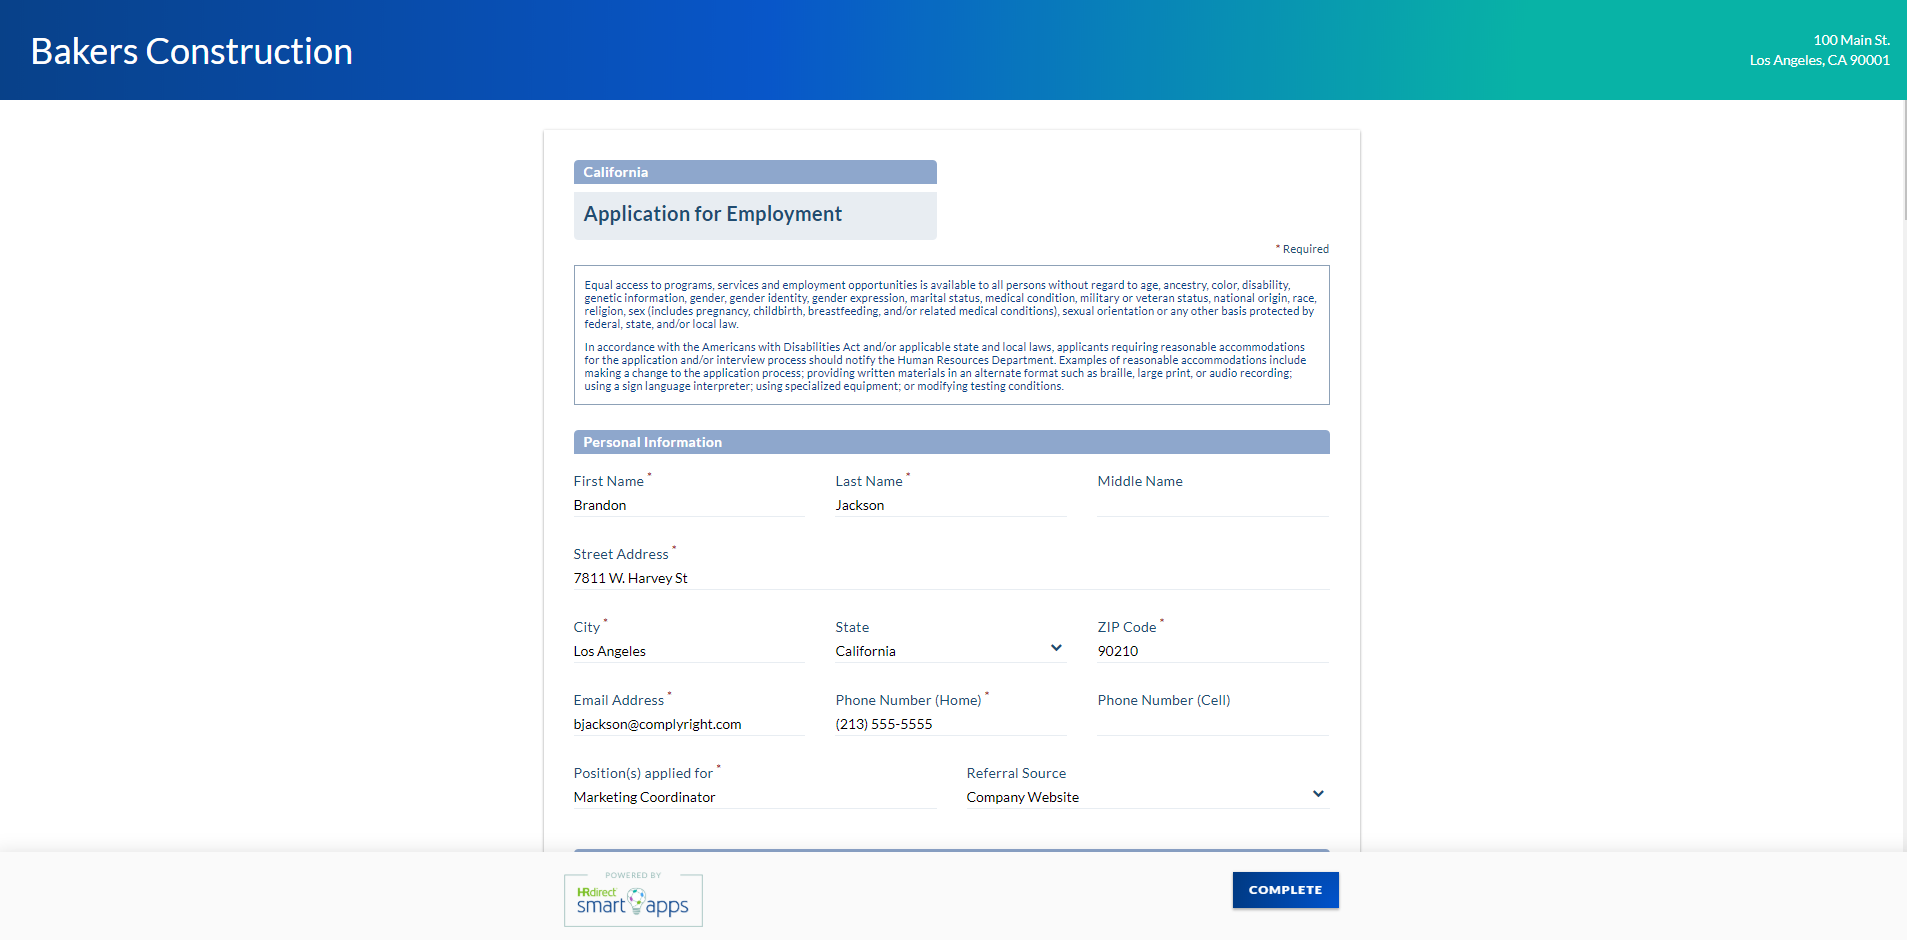 HRdirect Smart Apps Job Application - Applicant View